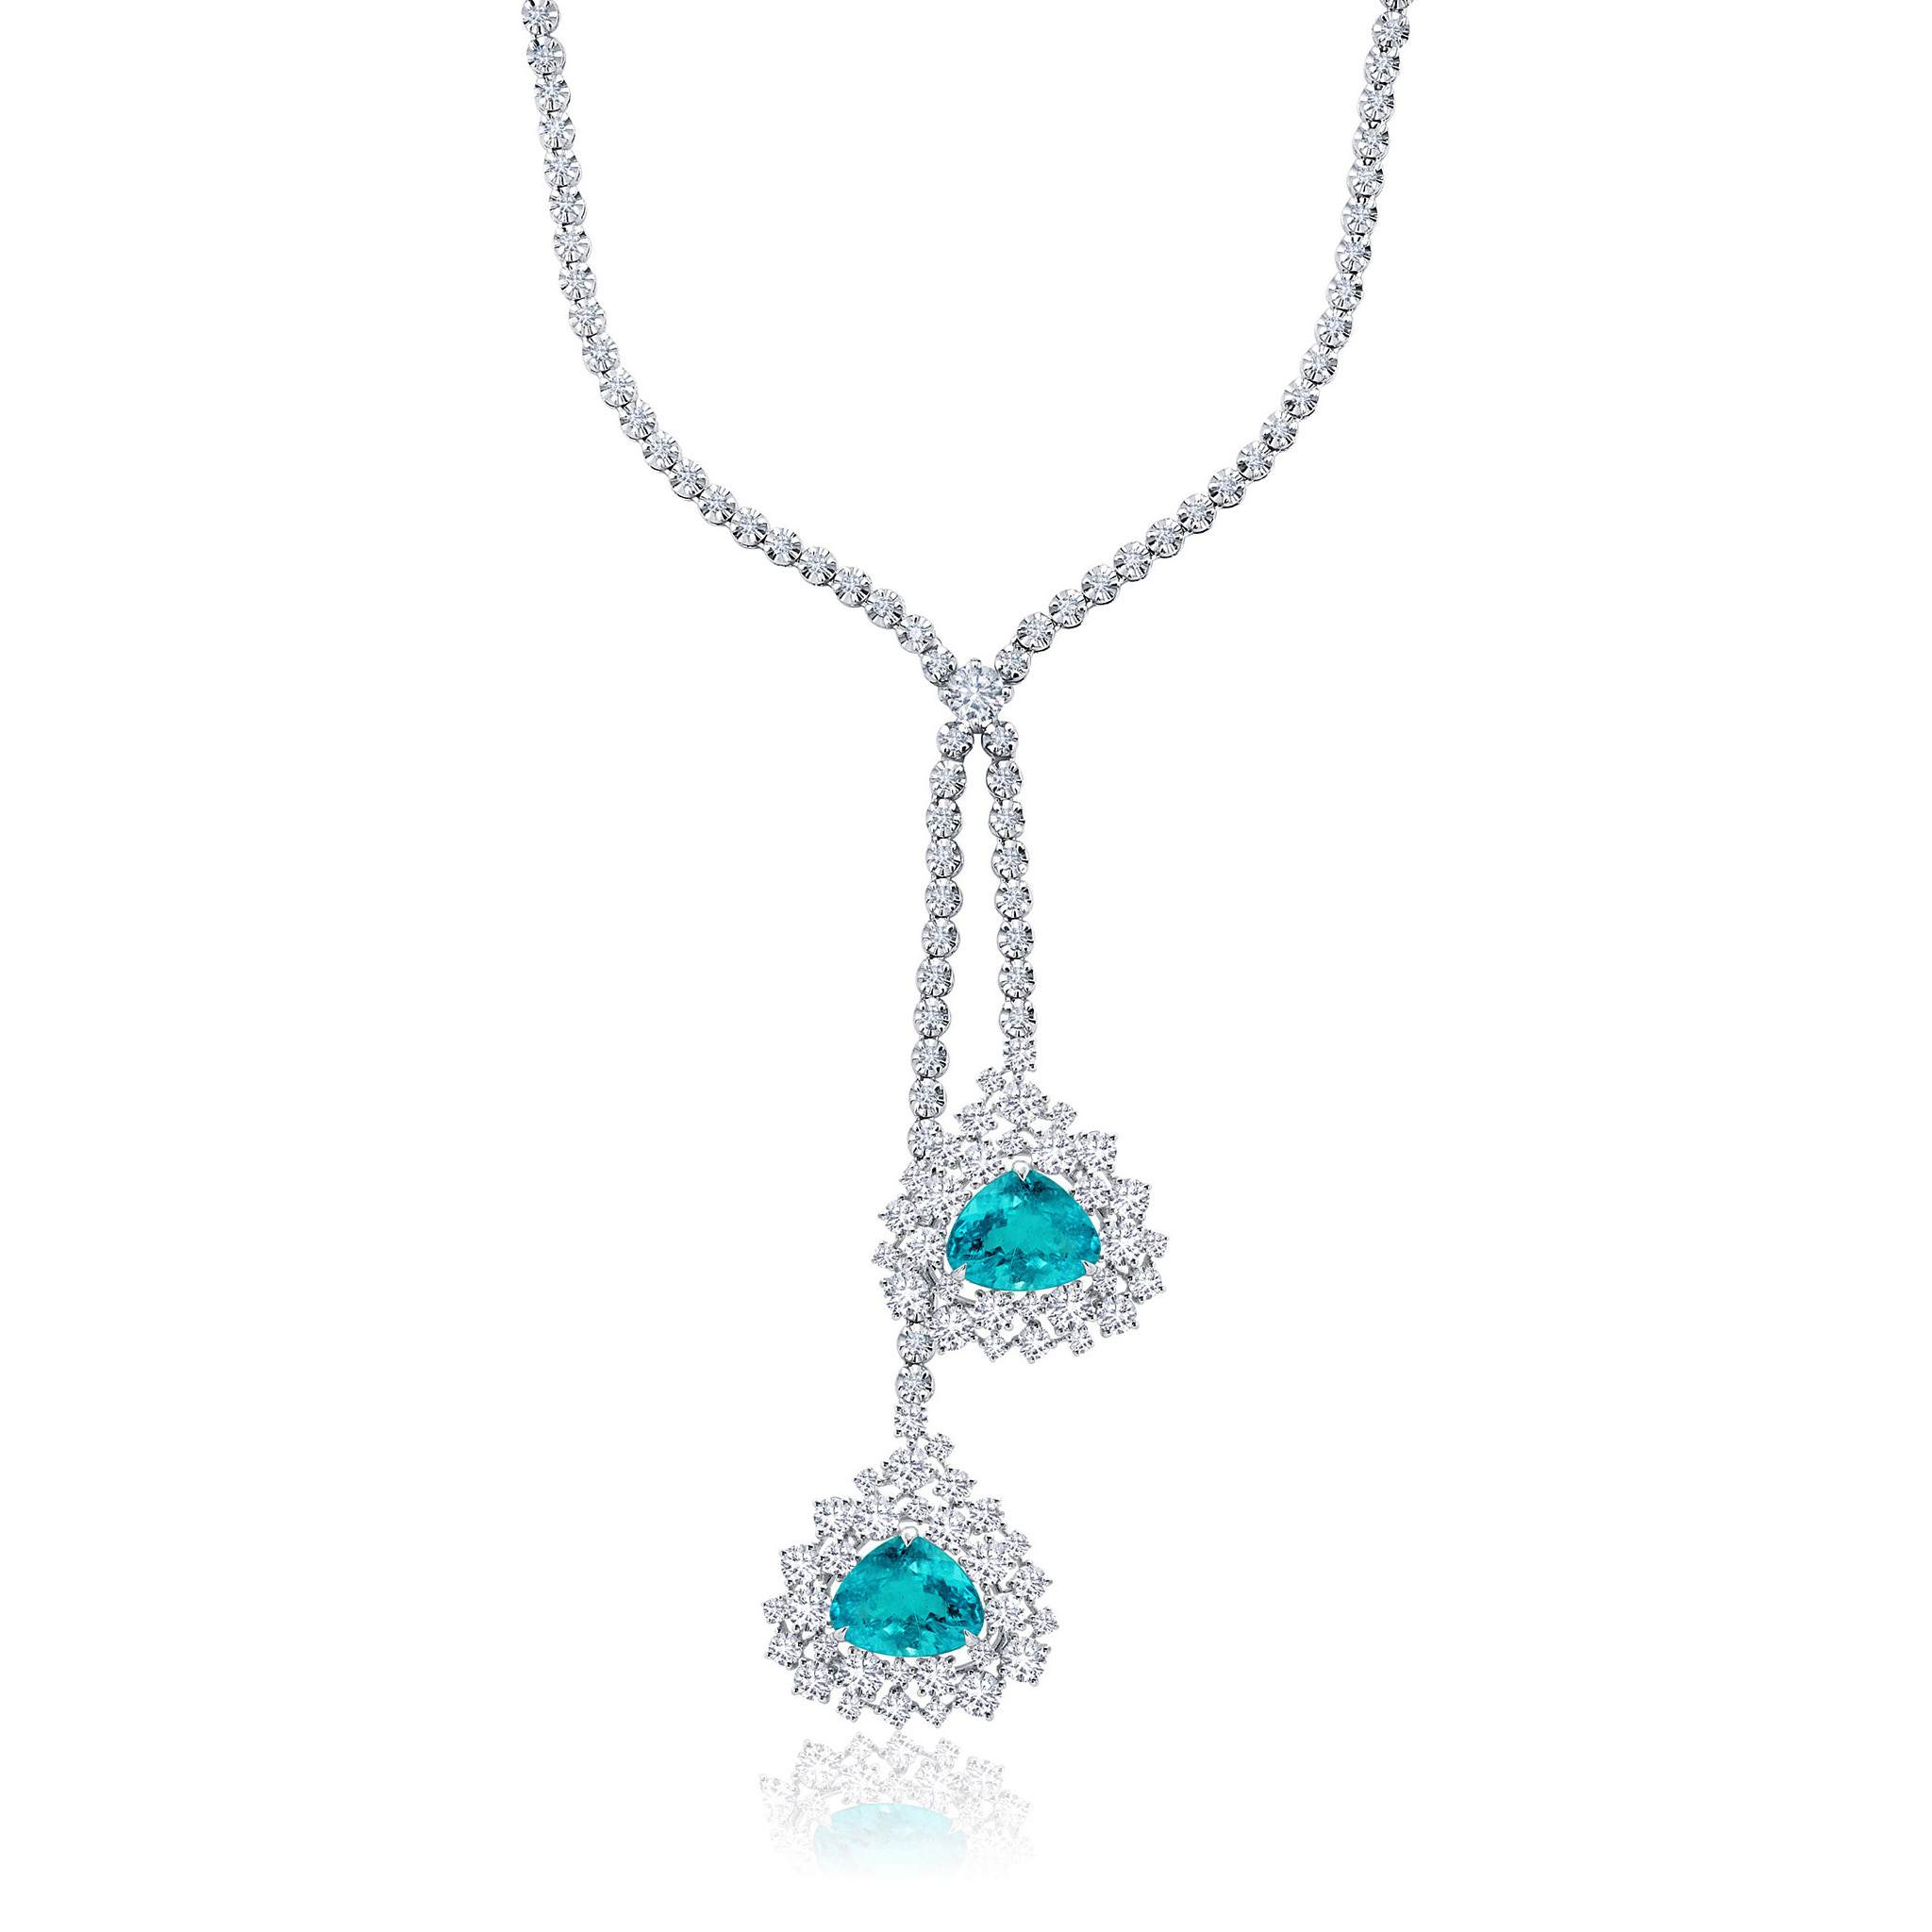 Graziela Gems - Necklace - Paraiba Obsession Convertible Earrings &amp; Necklace - 